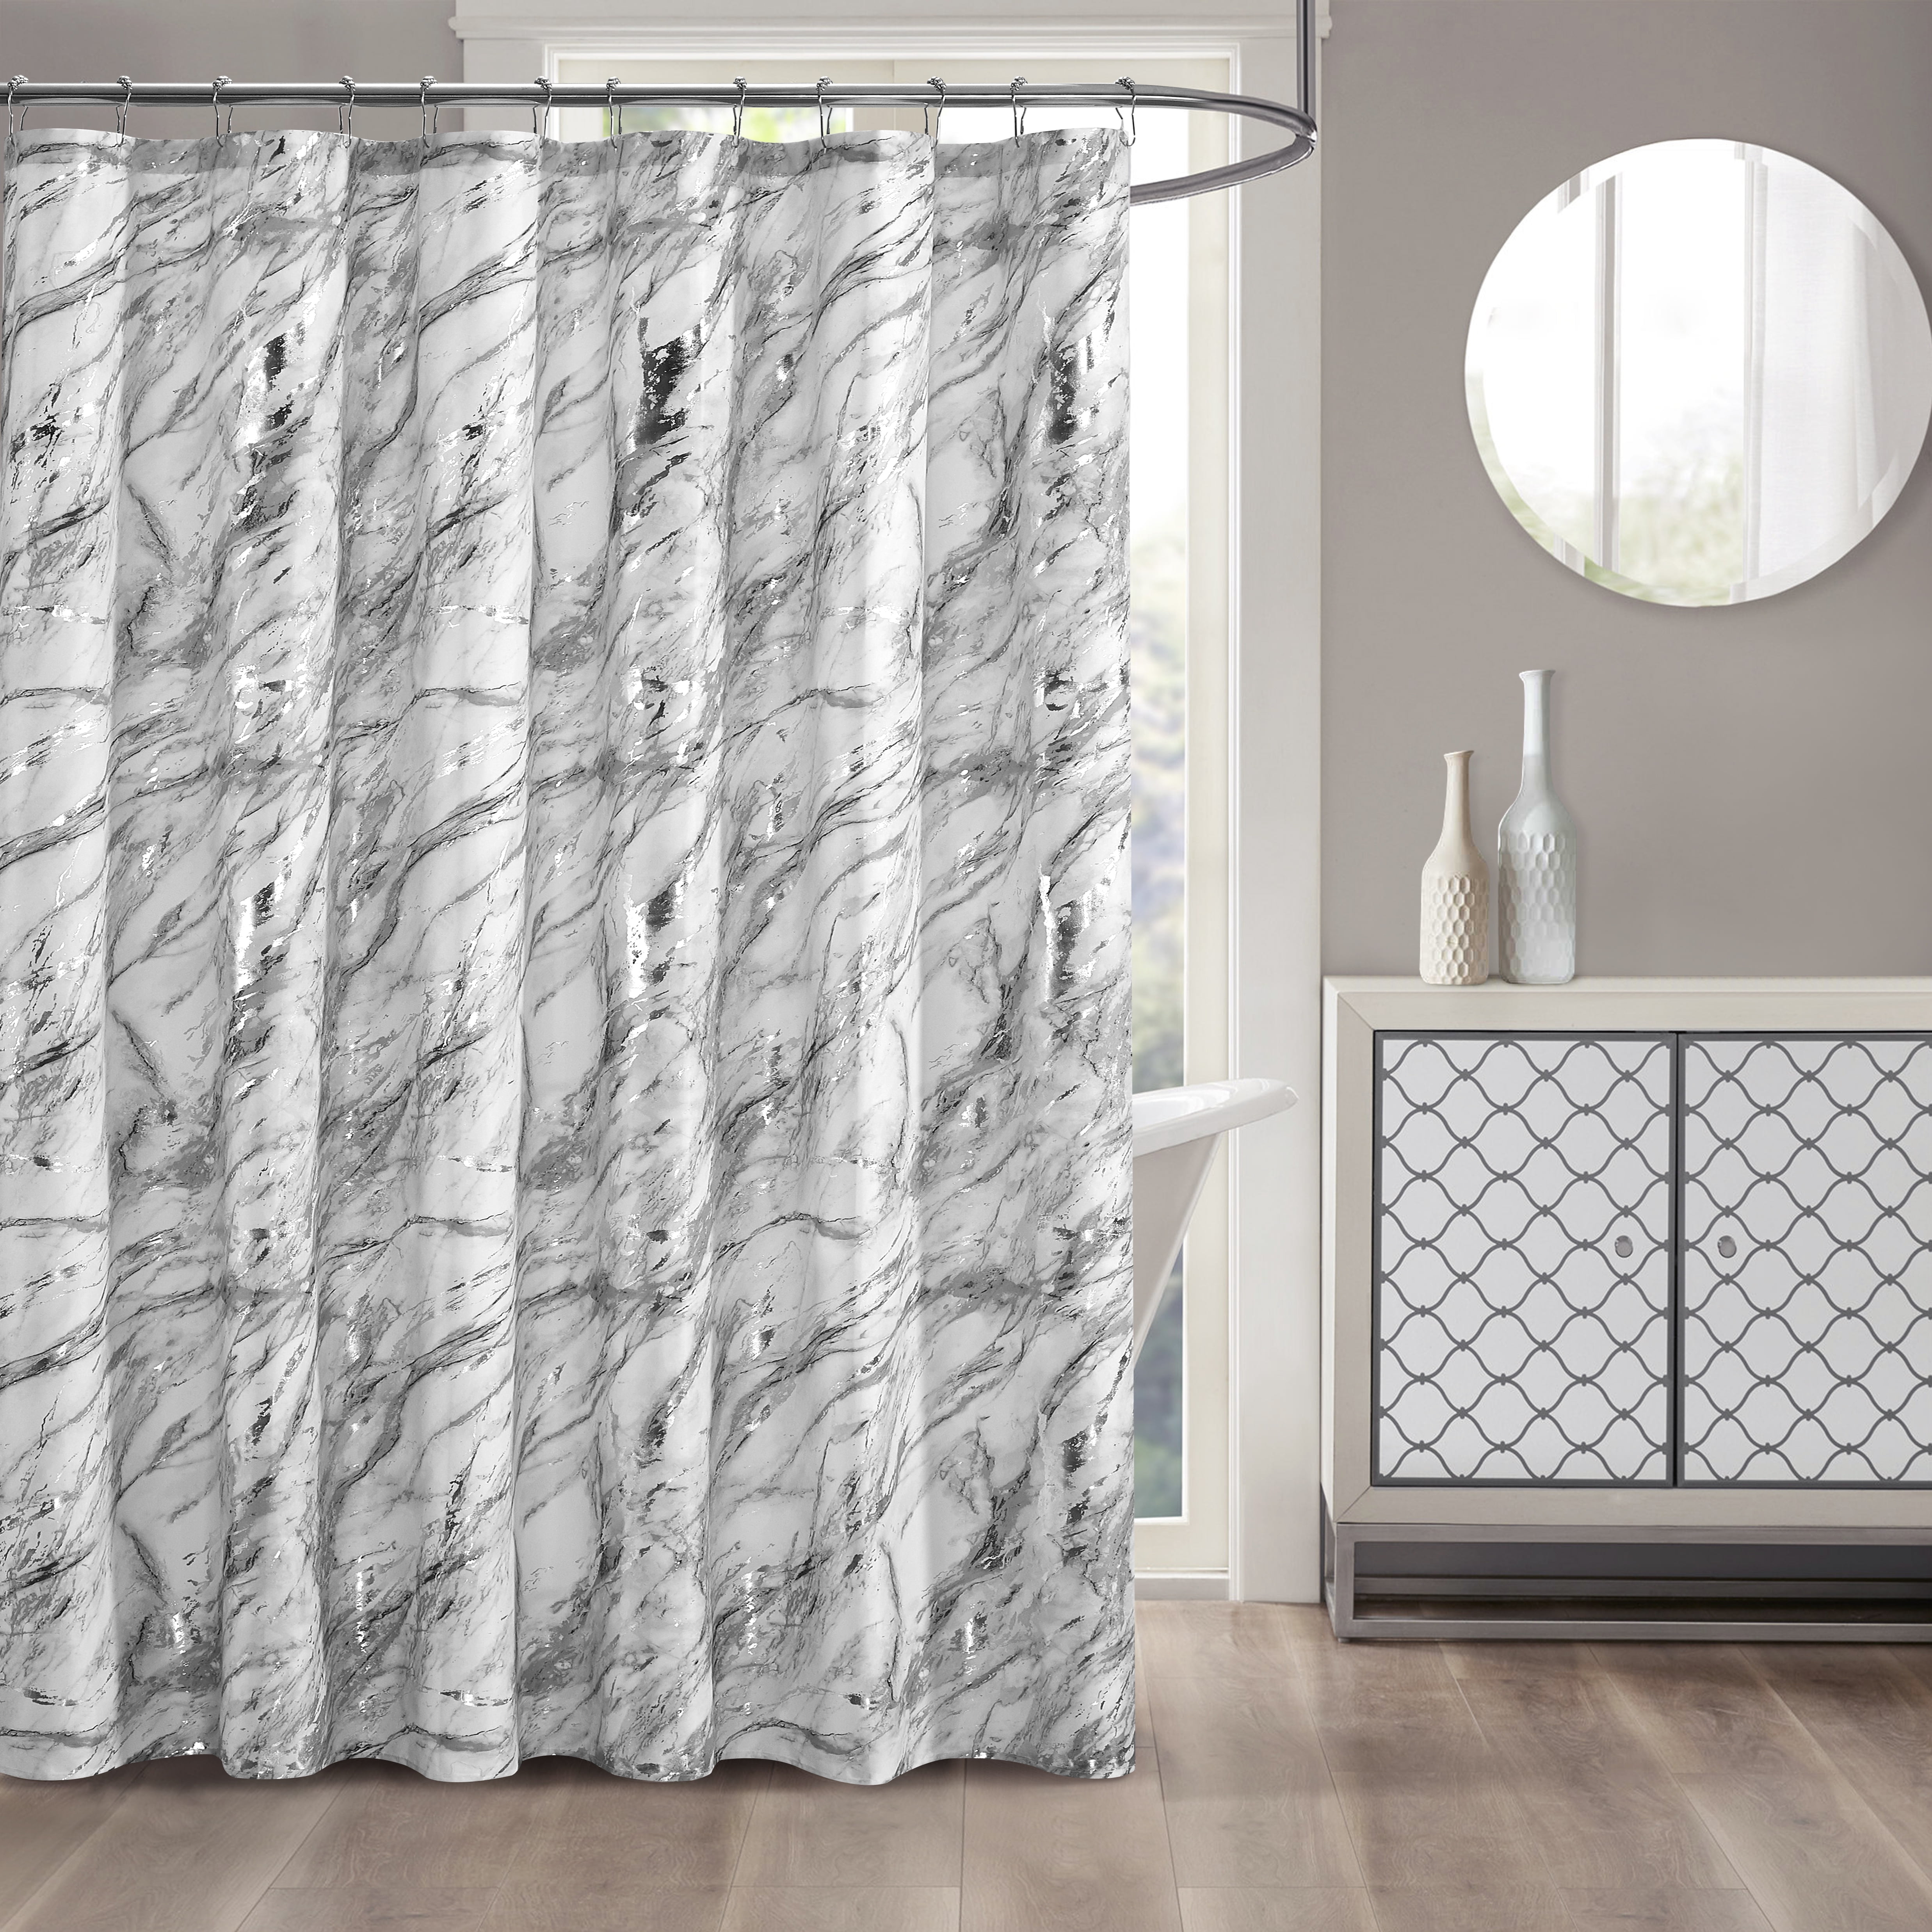 Uphome Marble Fabric Shower Curtain Extra Long White and Grey Cloth Shower Curta 